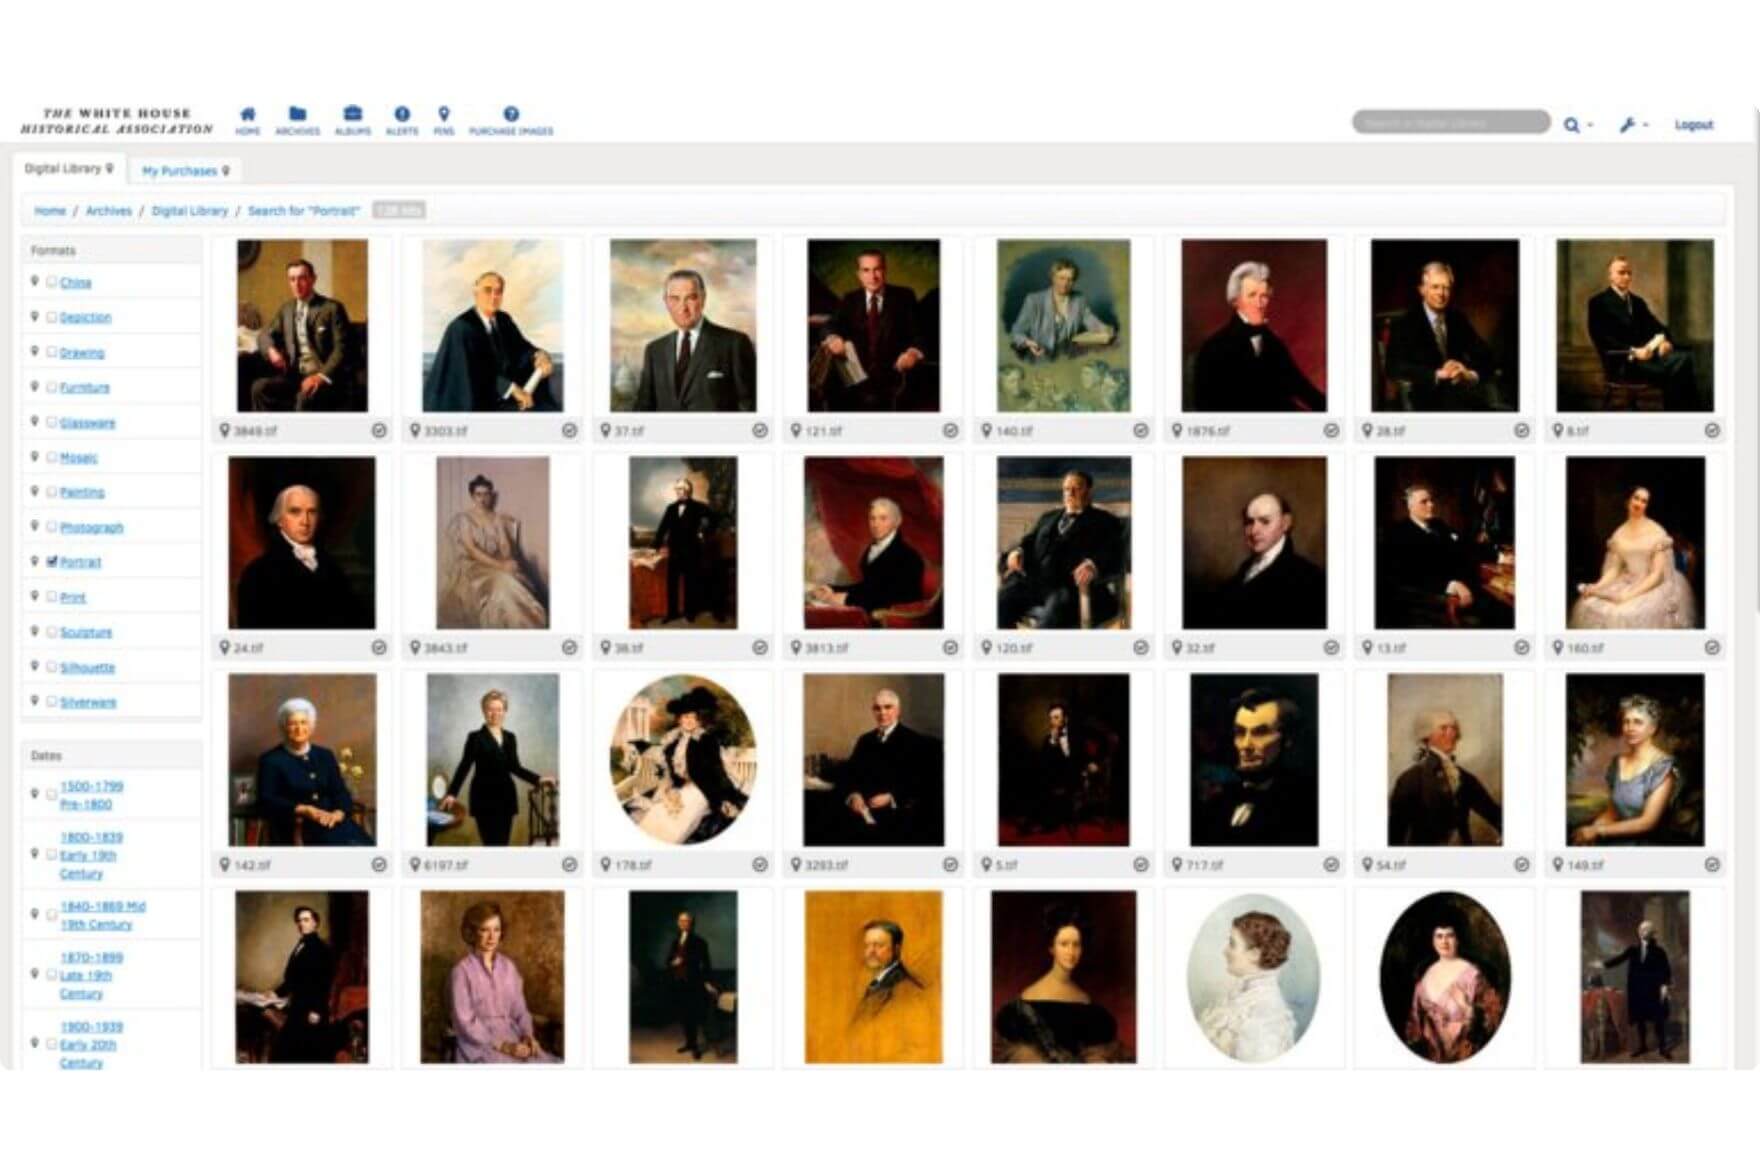 White House Association image library